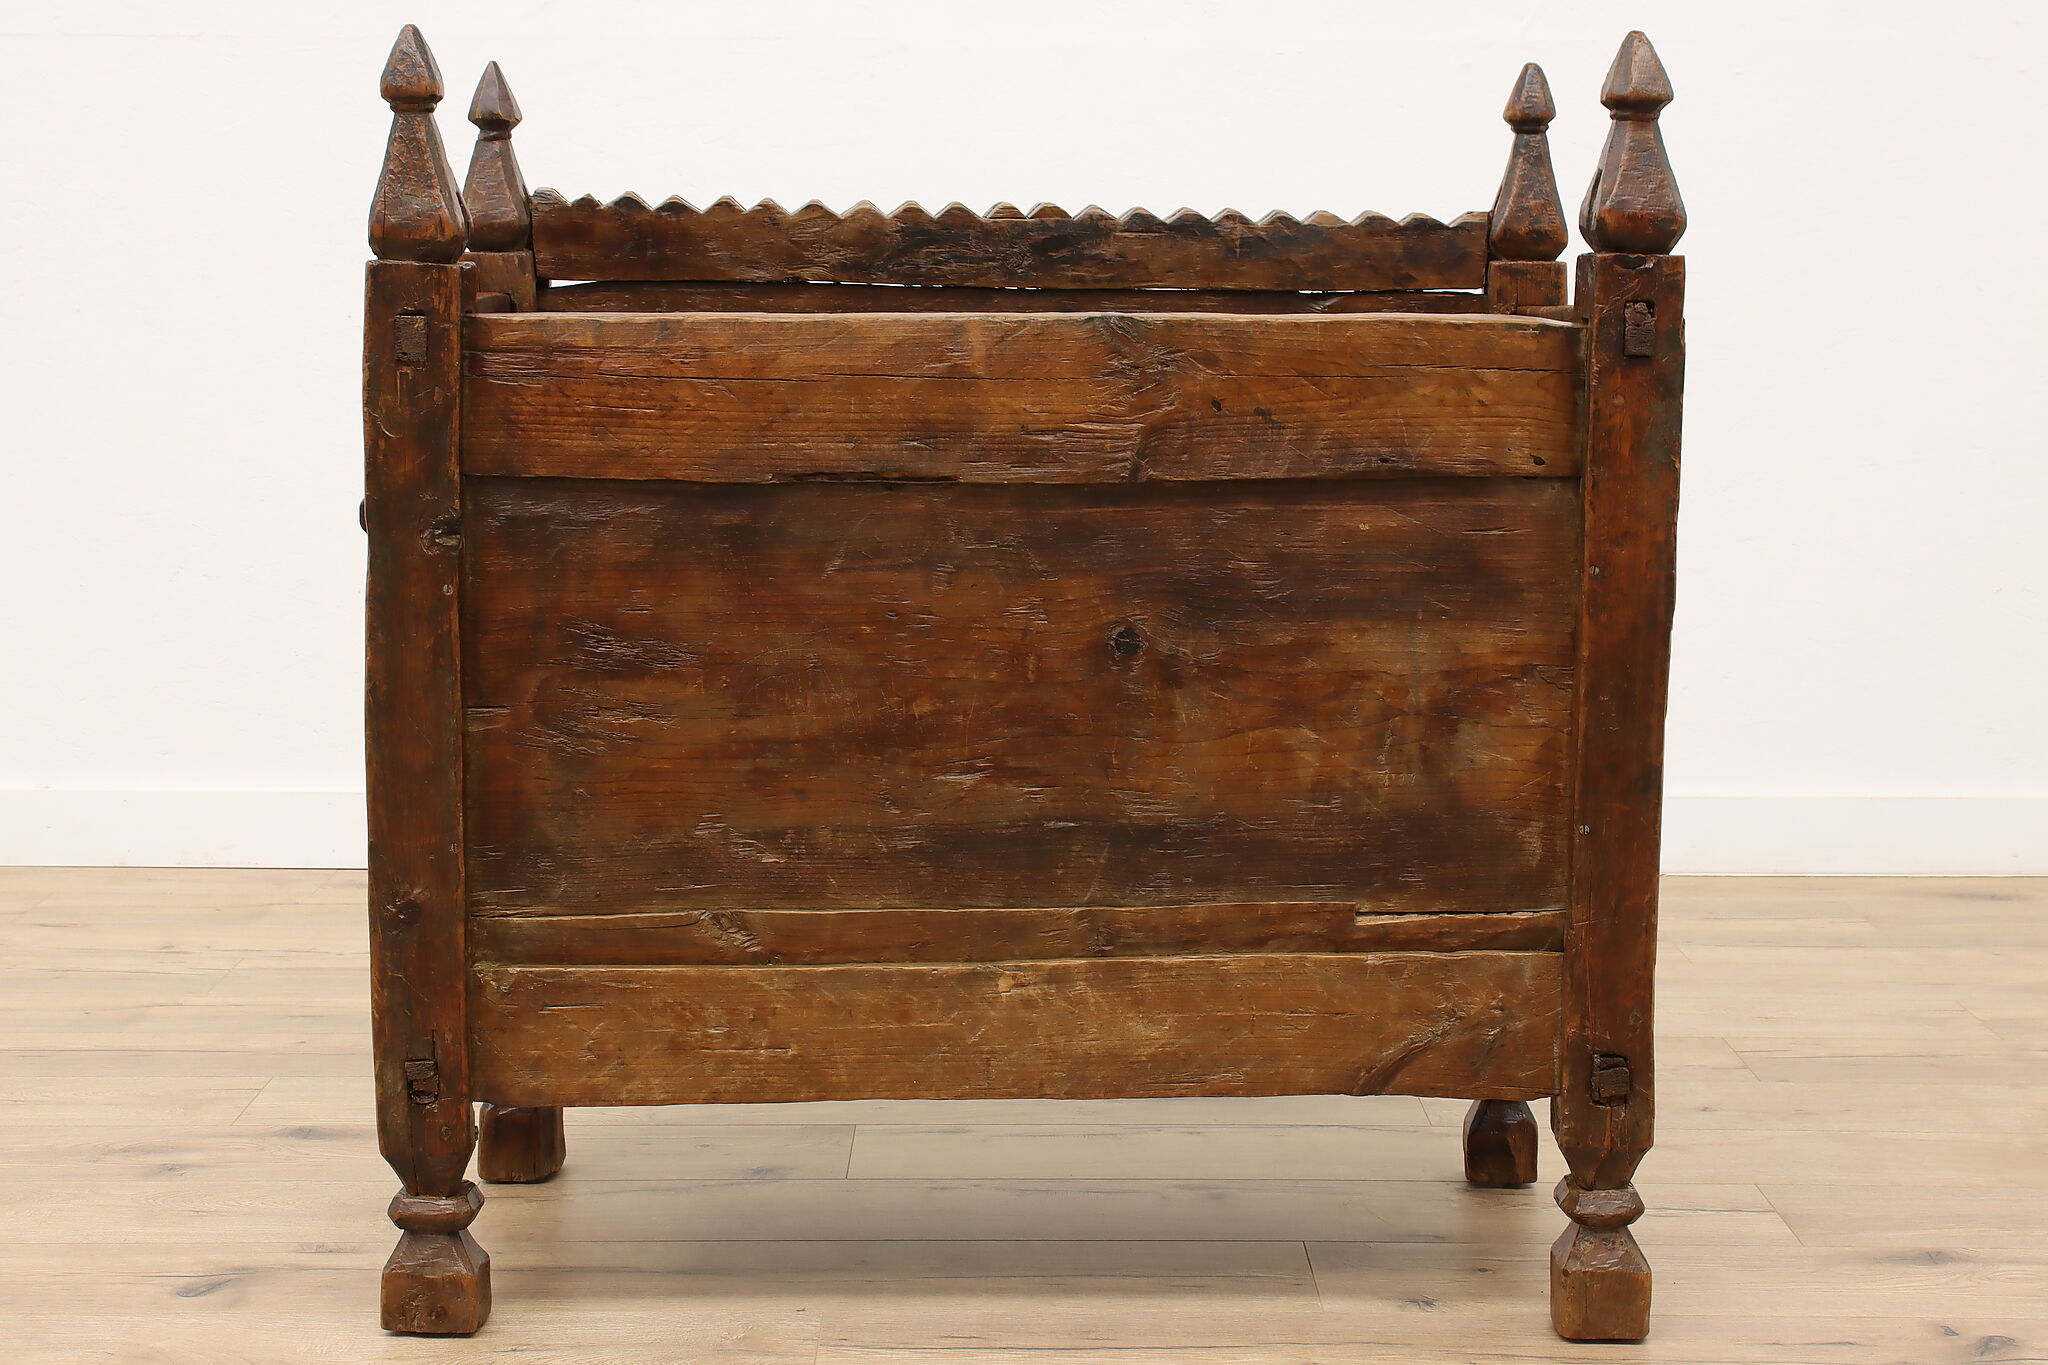 Bali Hand Carved Pine Antique marriage or Dowry Chest, Sliding Door